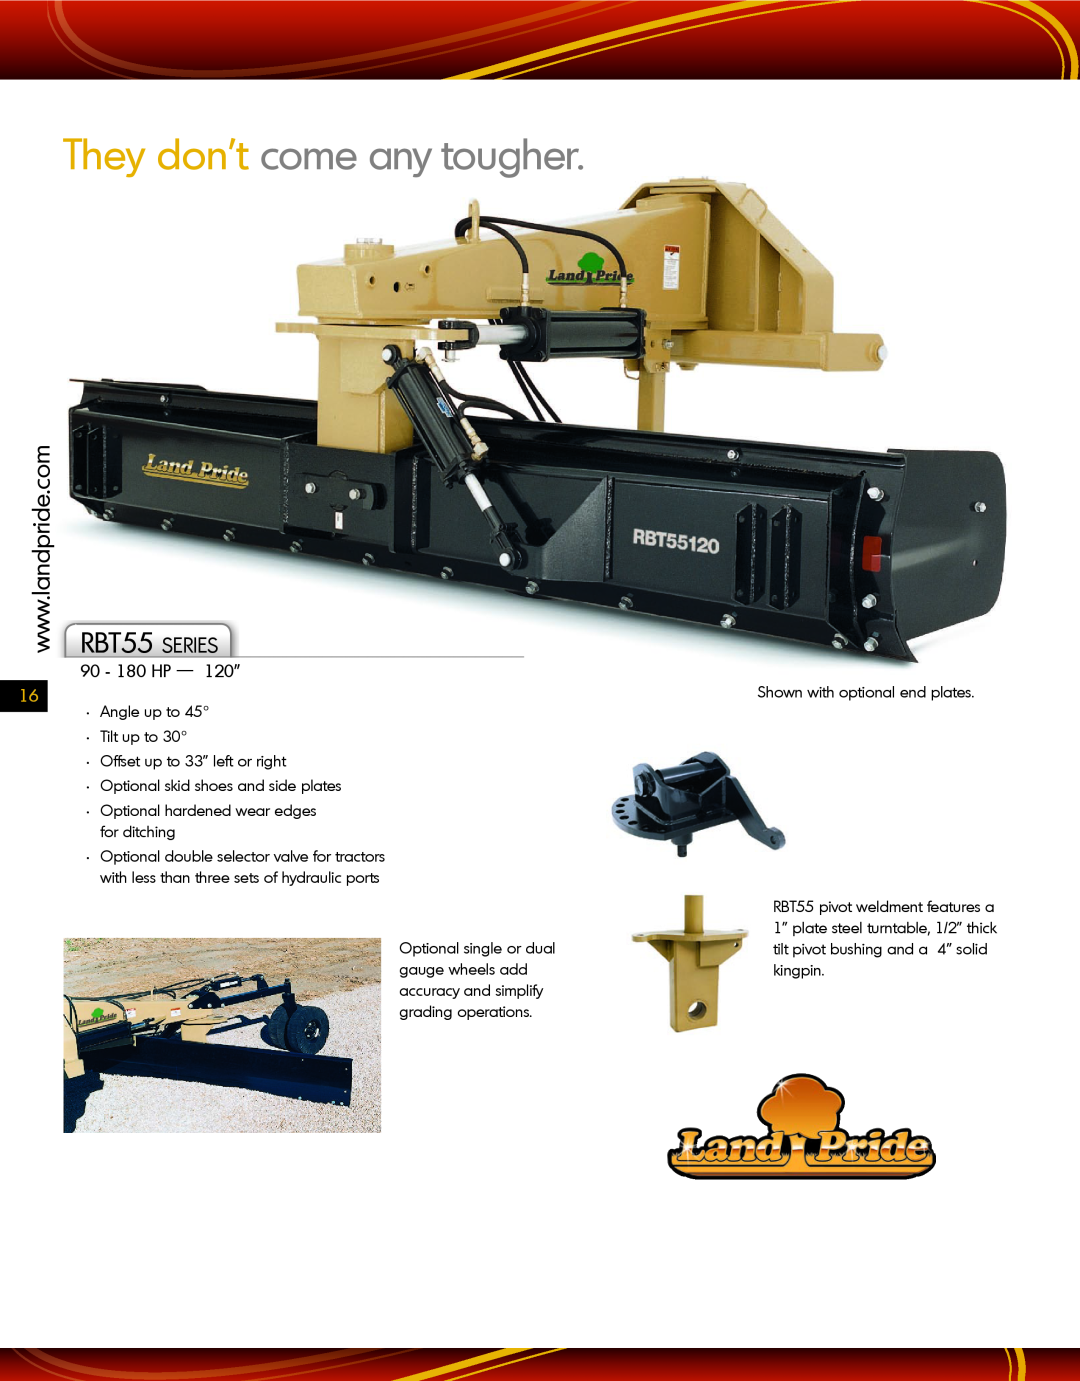 Land Pride manual They don’t come any tougher, RBT55 SERIES, 90 - 180 HP - 120” 